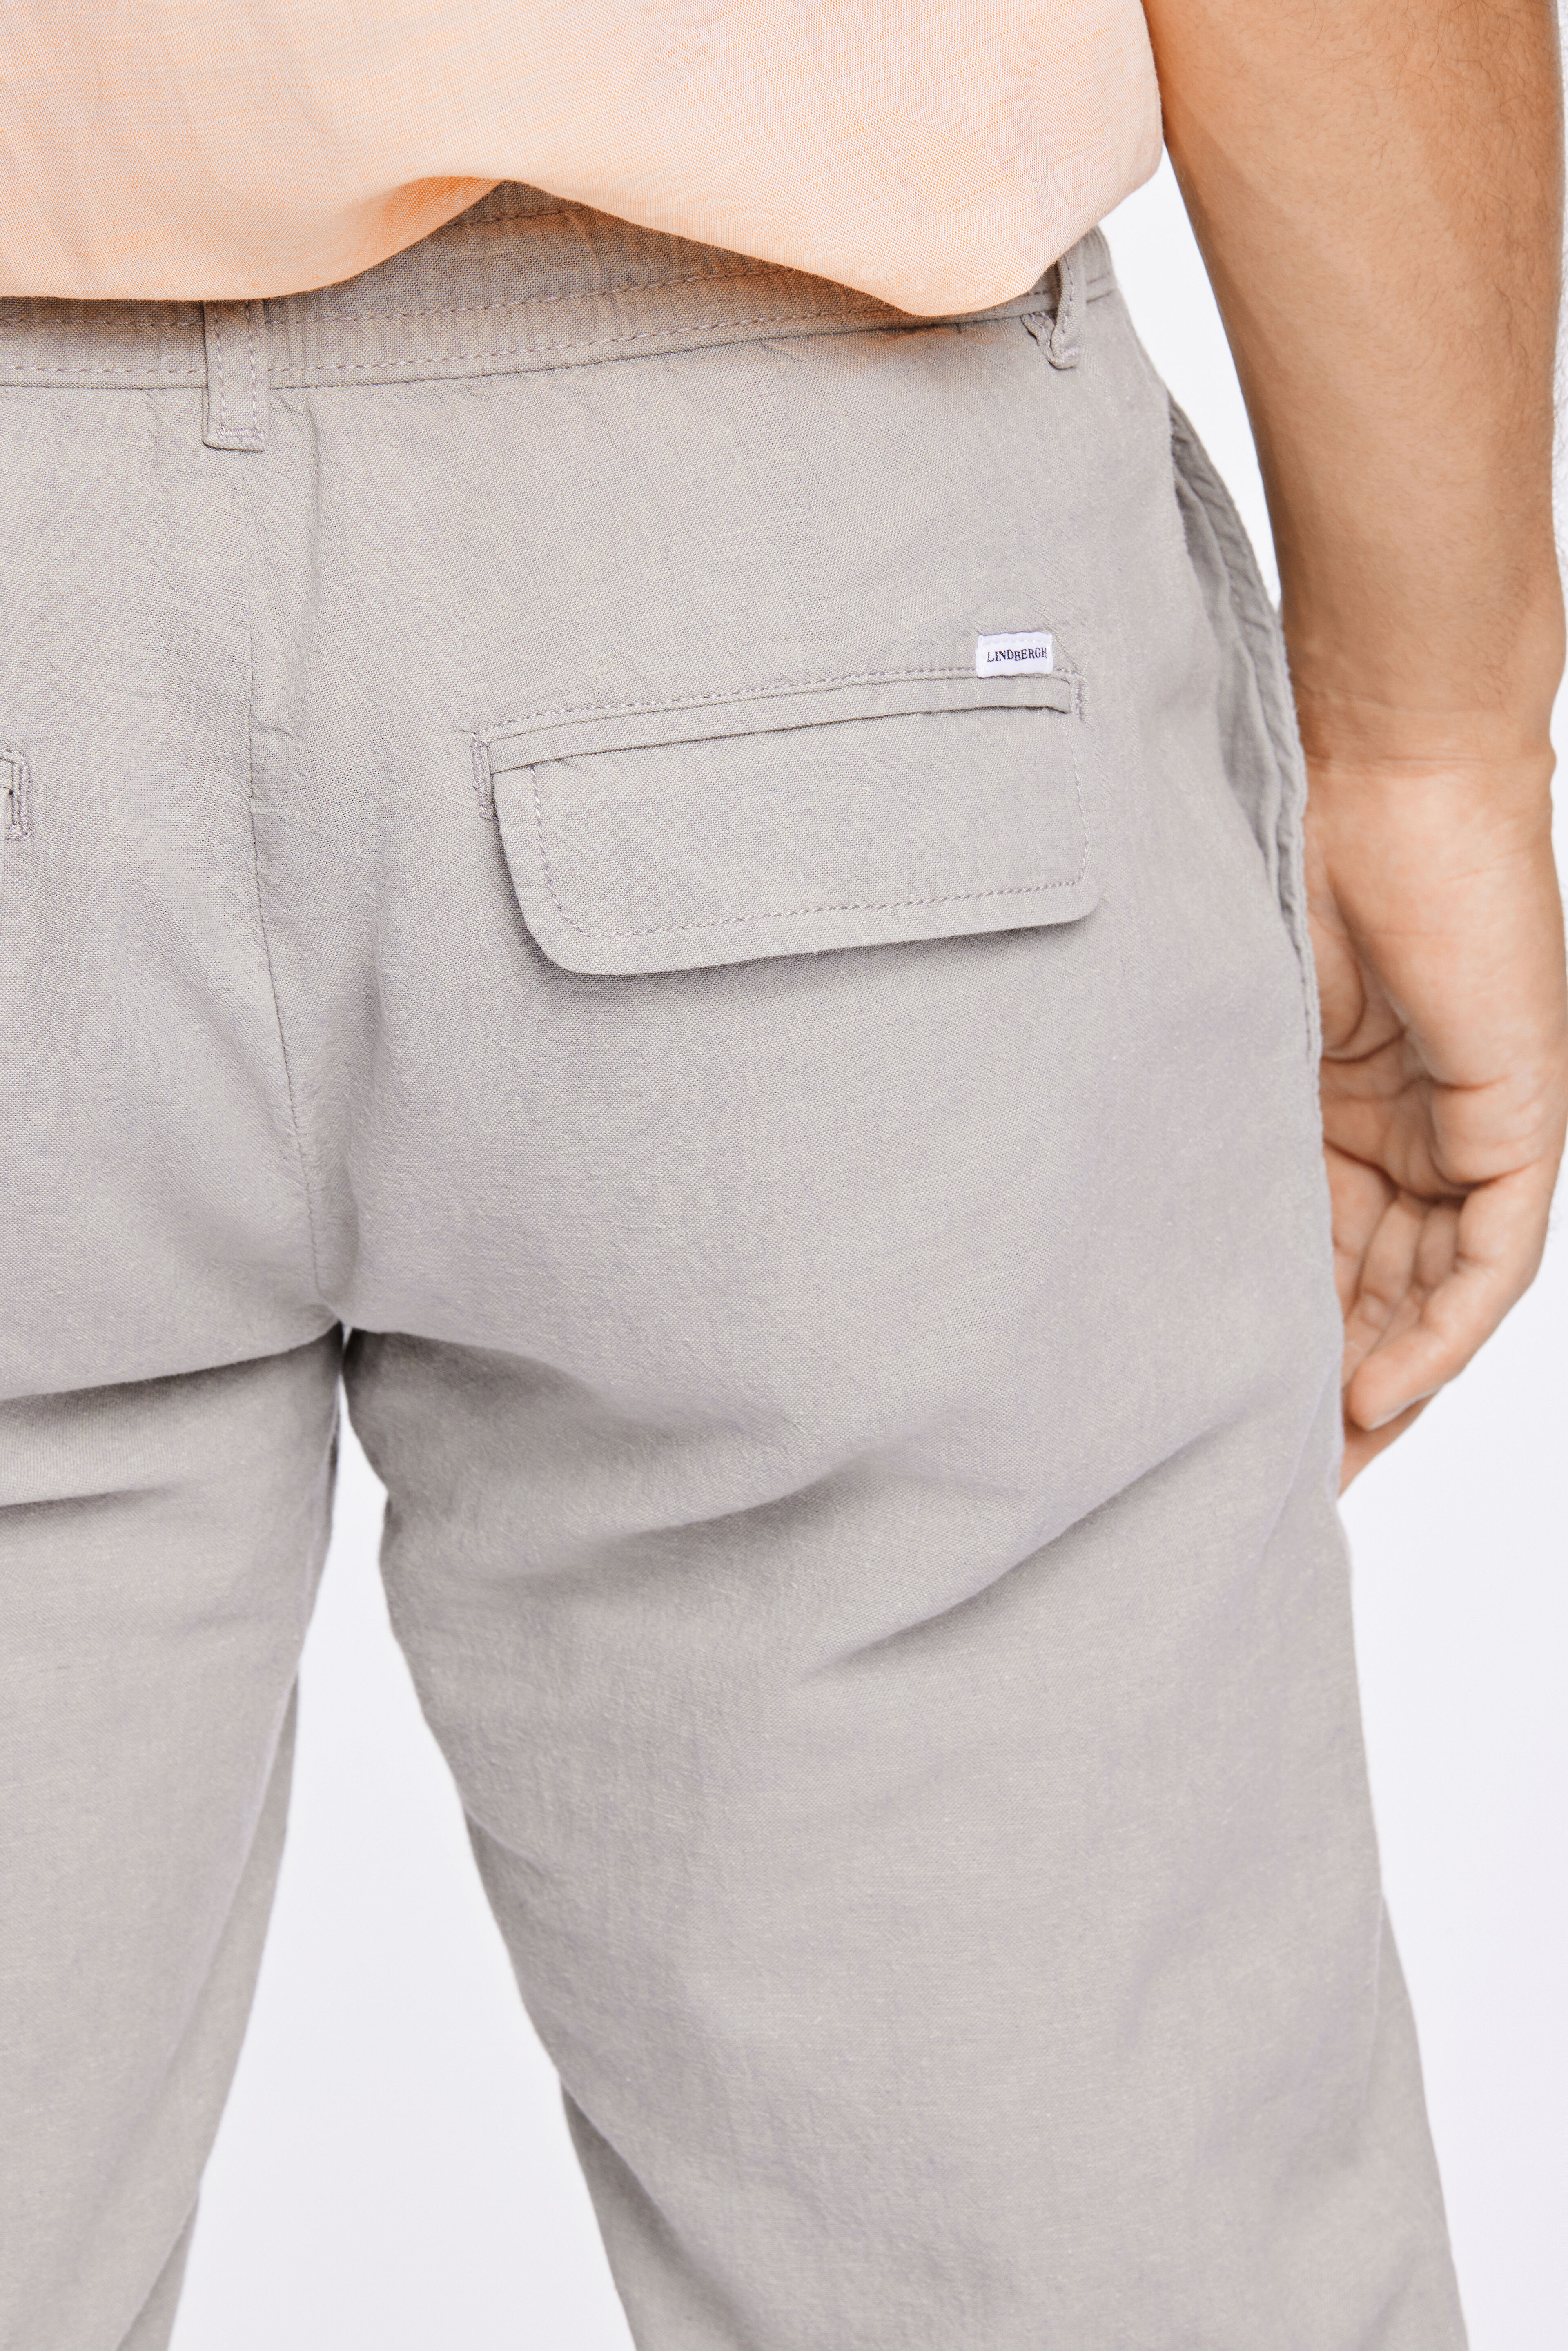 Linen pants | Tapered fit 30-008003